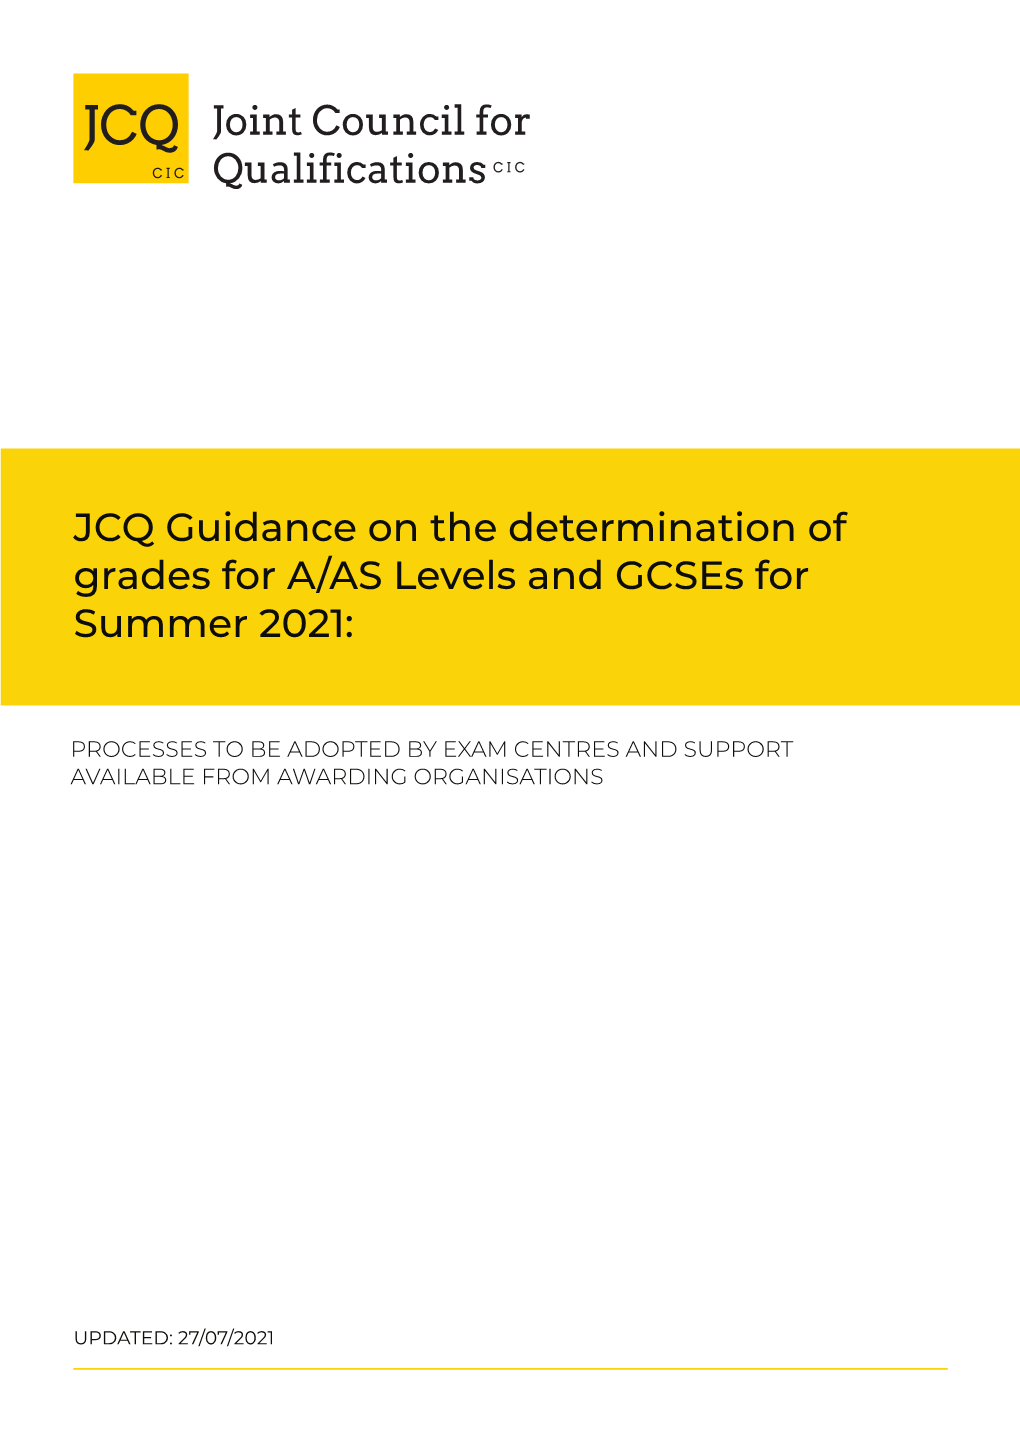 JCQ Guidance on the Determination of Grades for A/AS Levels and Gcses